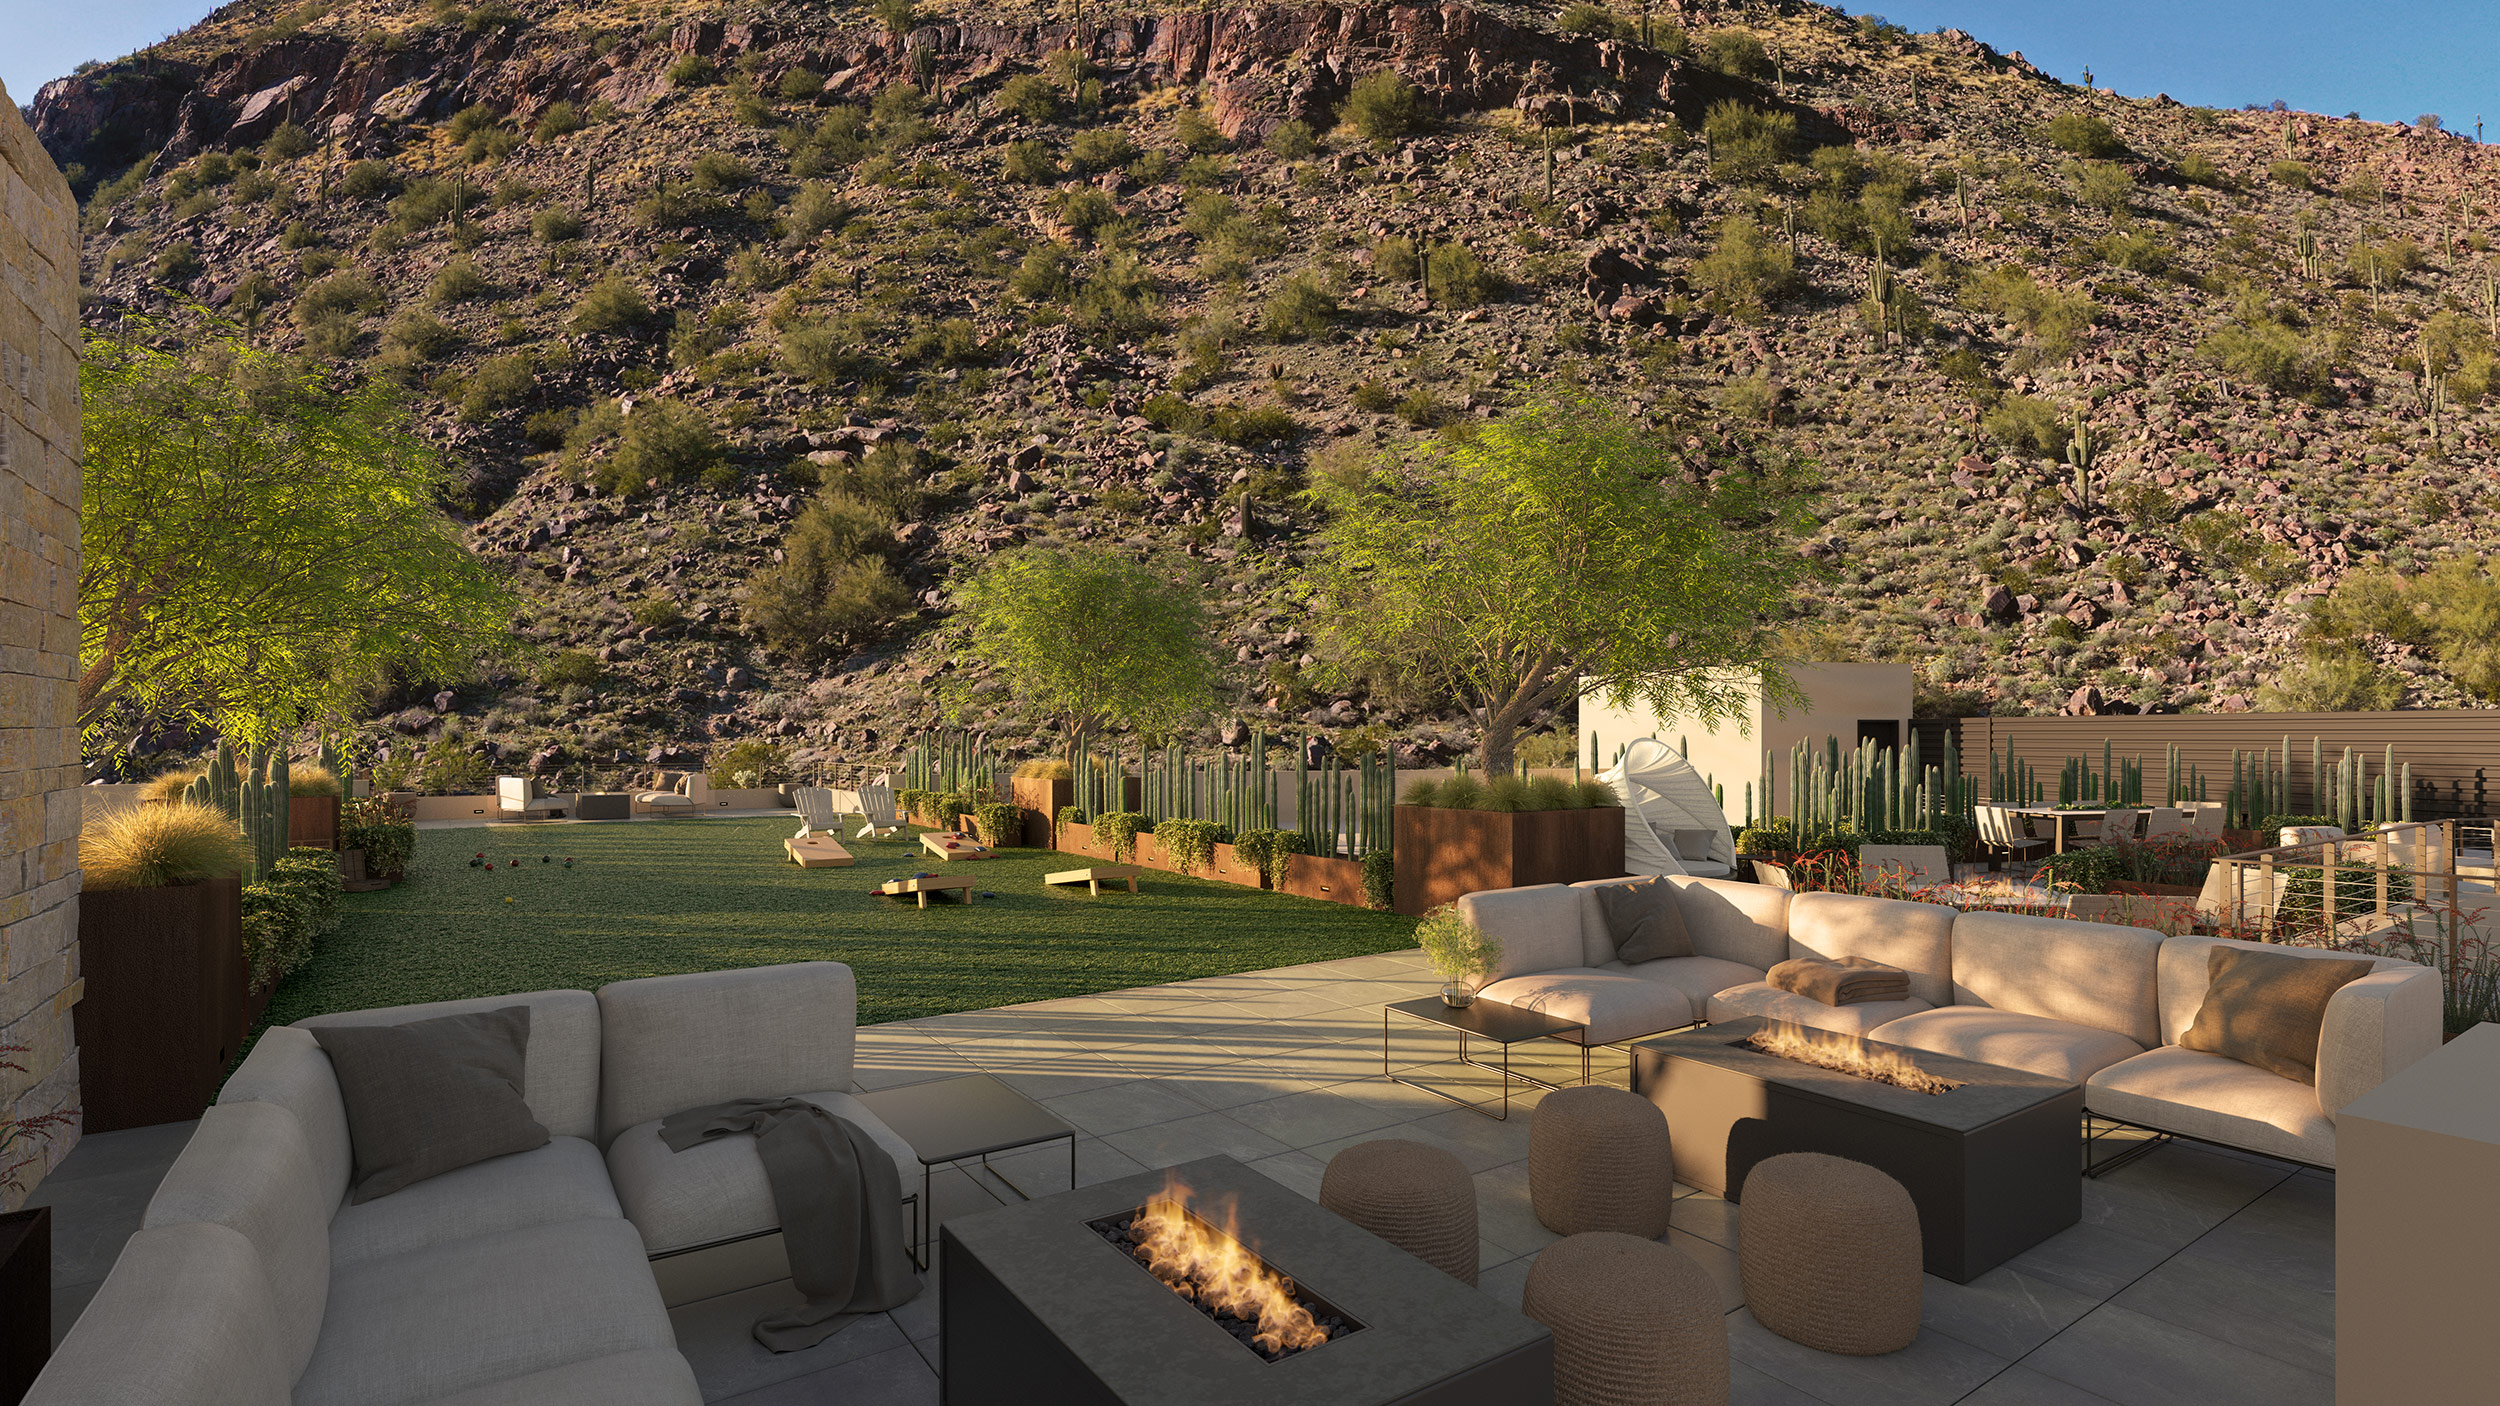 Gather for a glass of wine and a game of bocce at The Summit, with views of the Valley and Camelback Mountain.